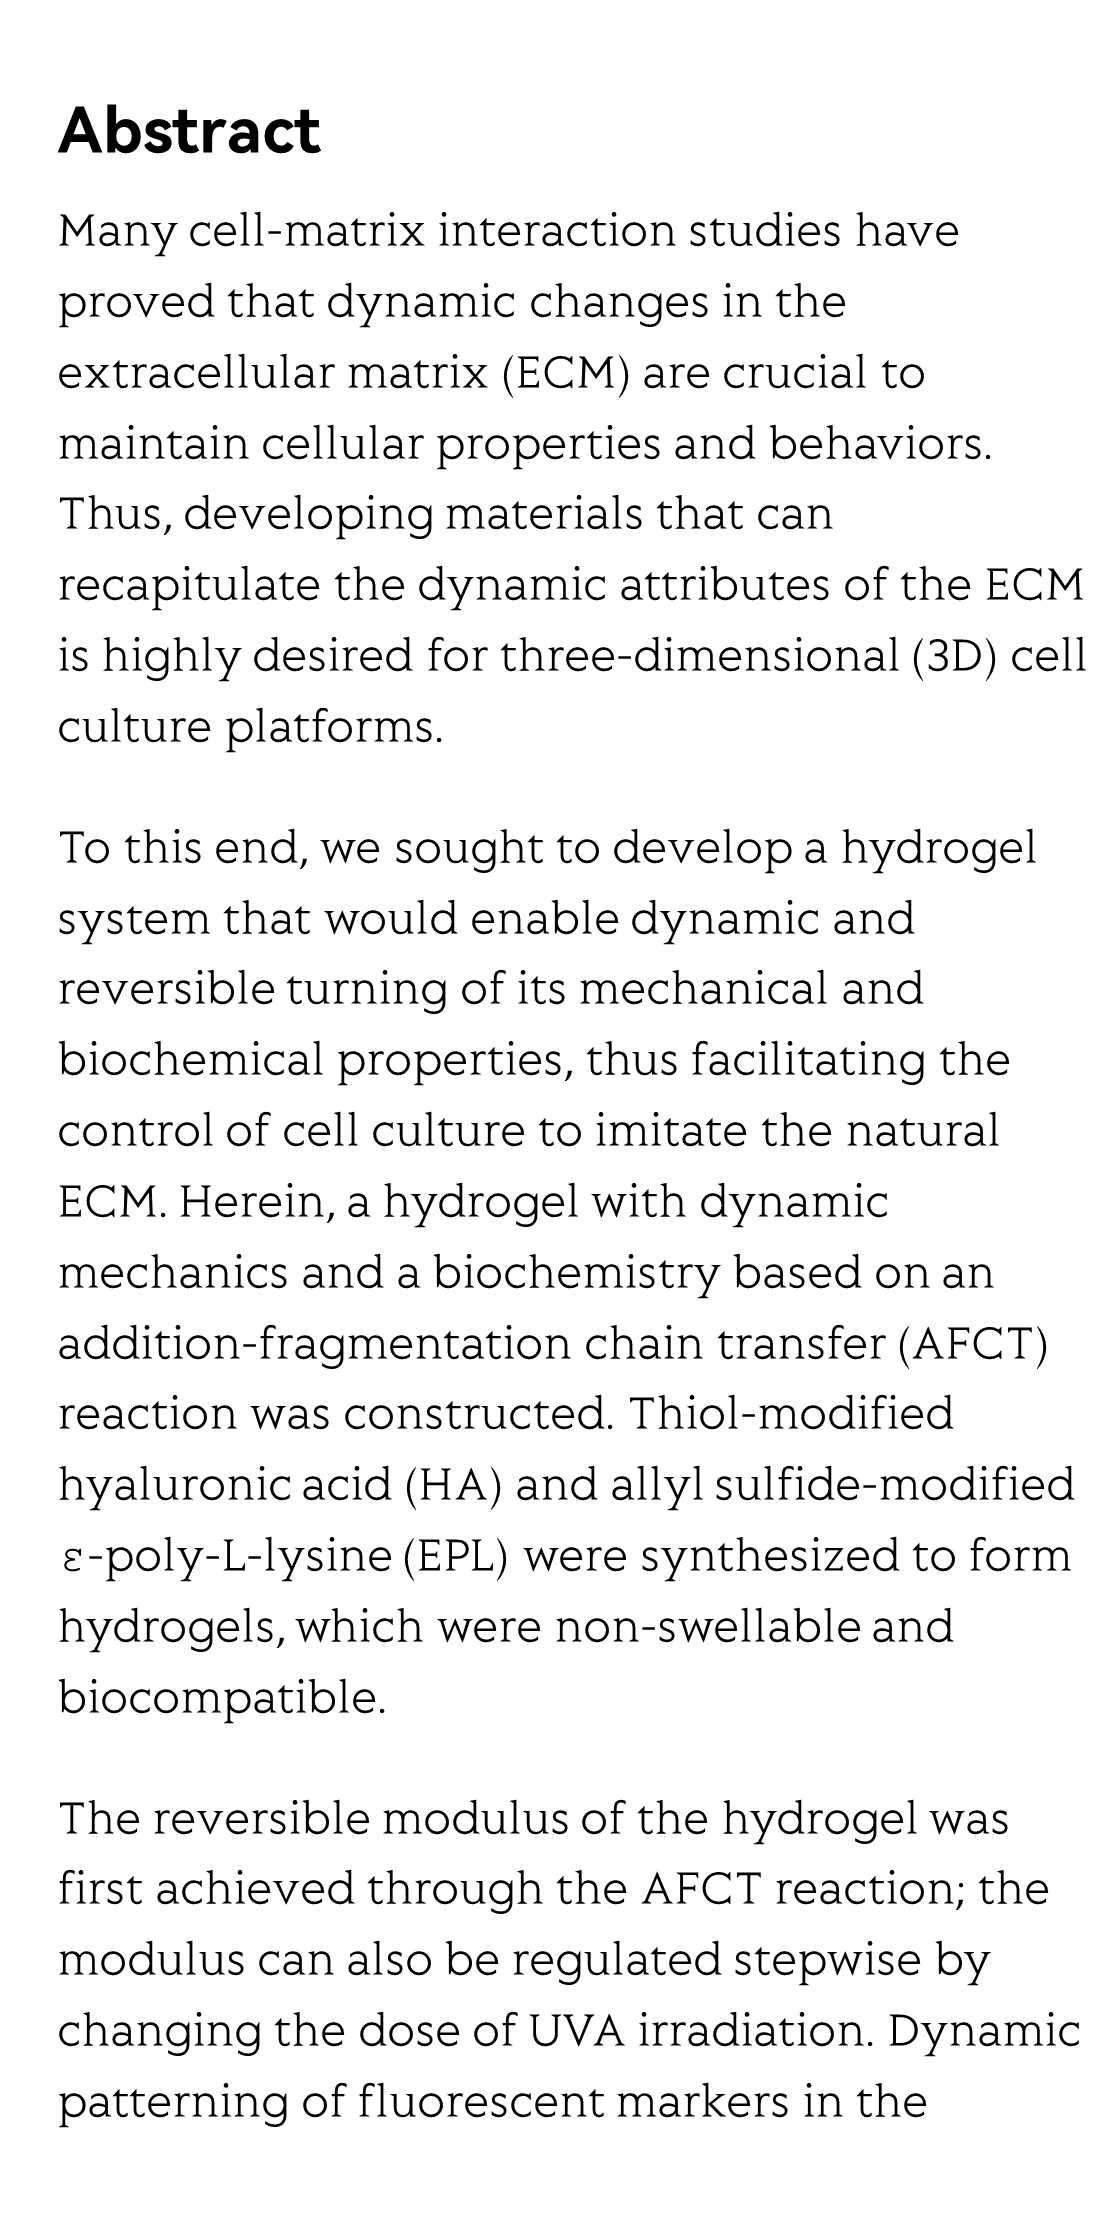 Hydrogels with Dynamically Controllable Mechanics and Biochemistry for 3D Cell Culture Platforms_2